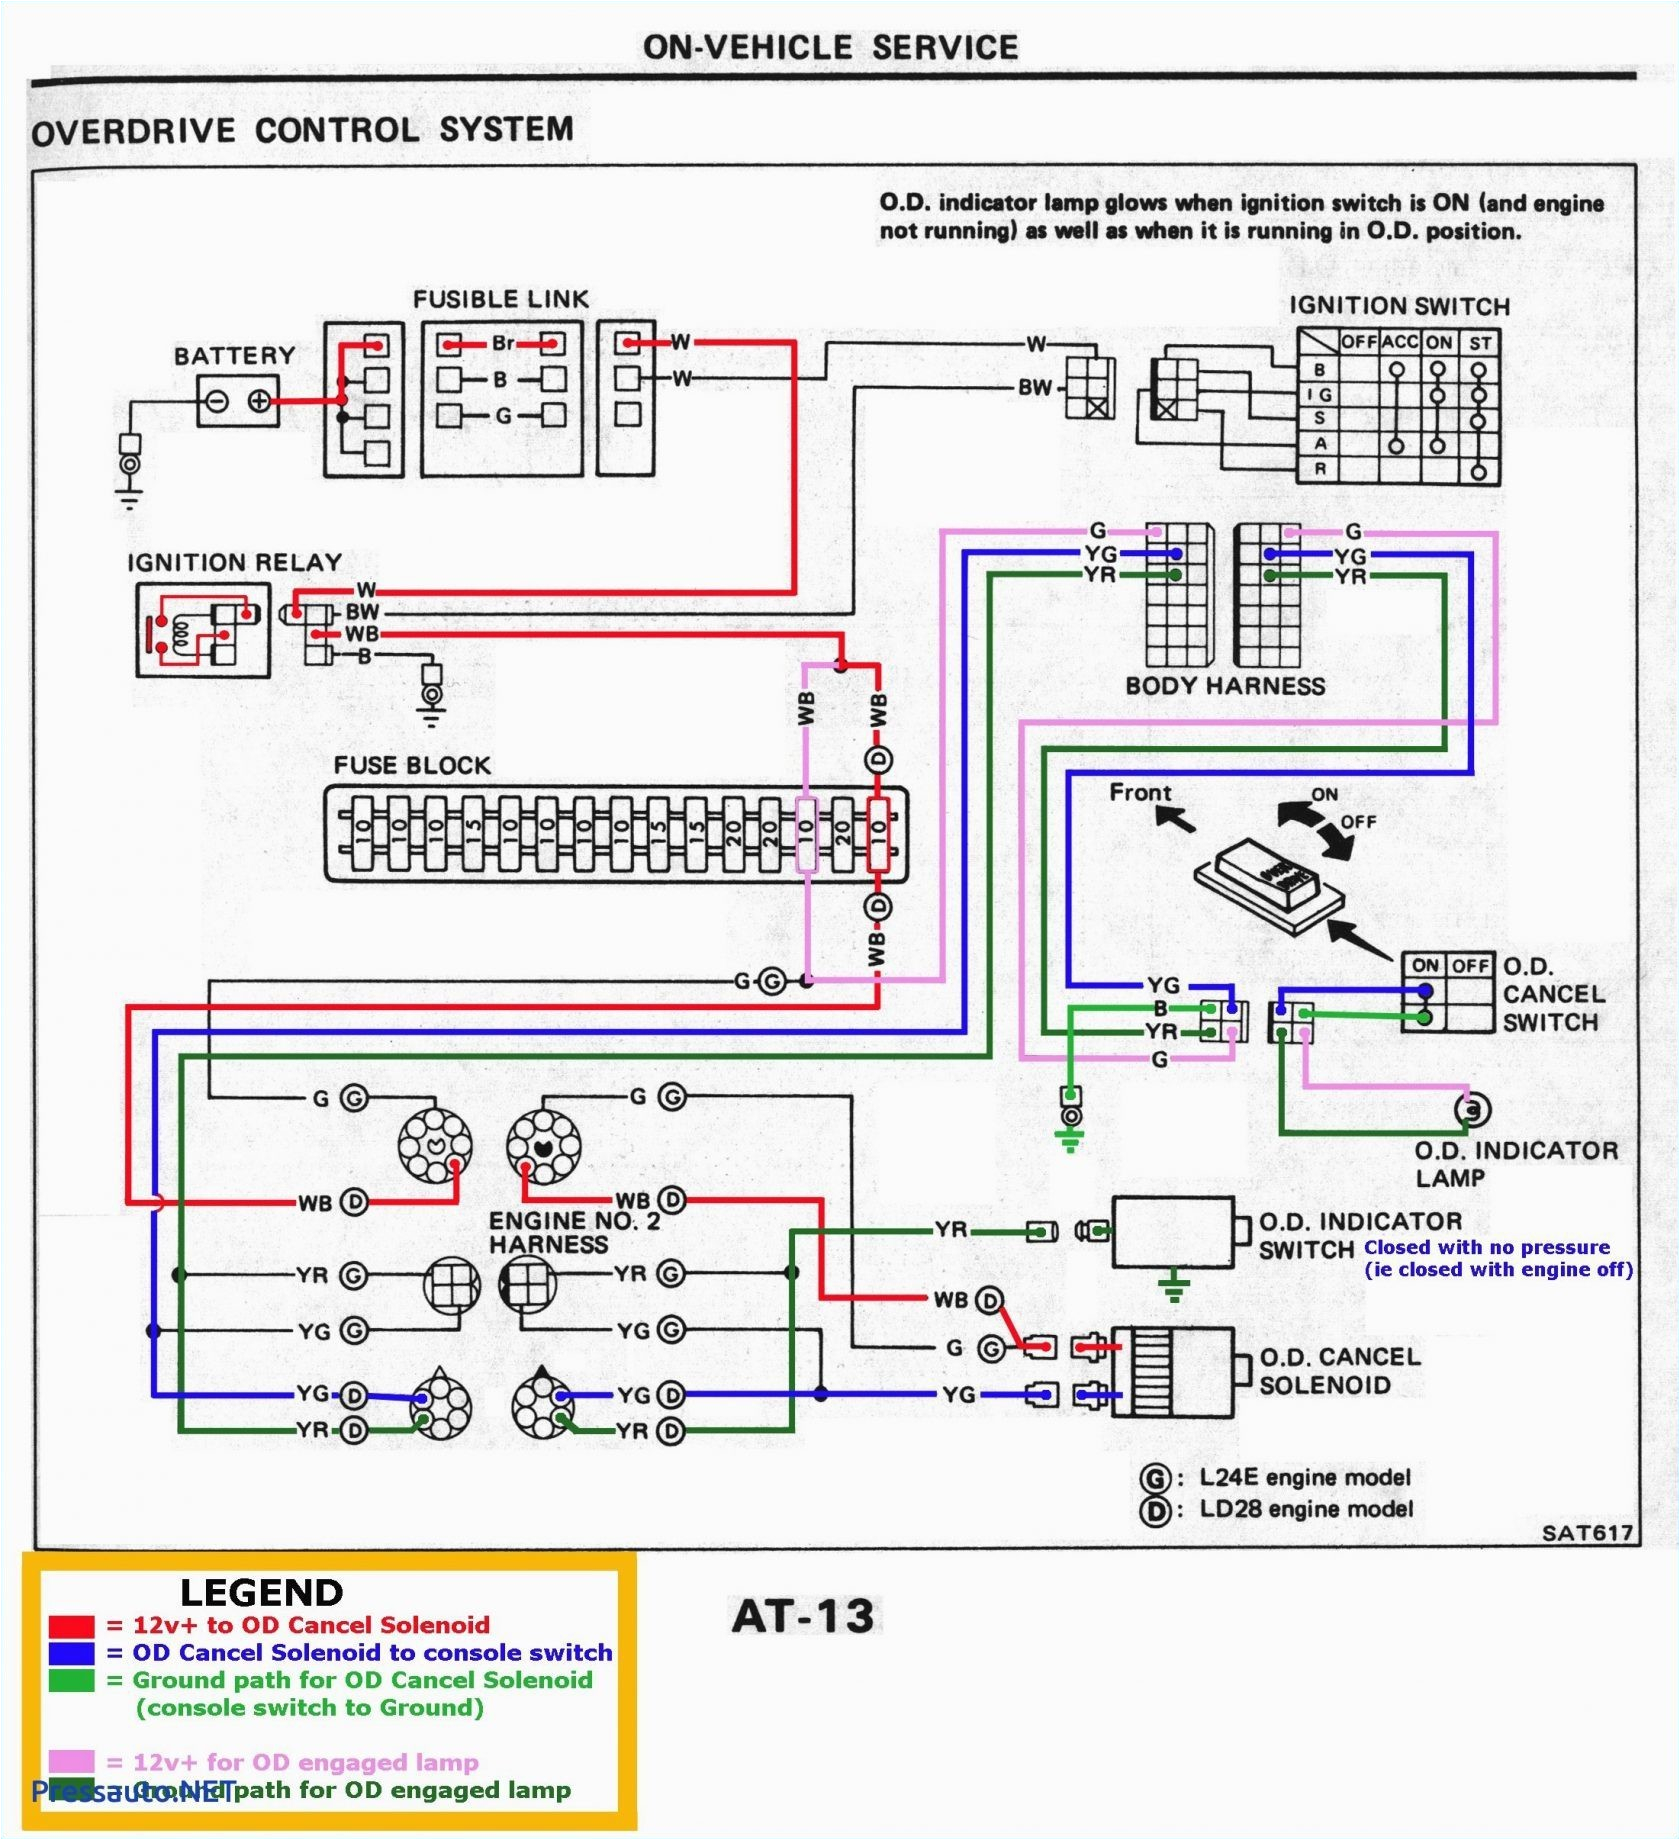 gm 22694036 ignition wiring harness wiring diagram can gm 22694036 ignition wiring harness wiring diagram value